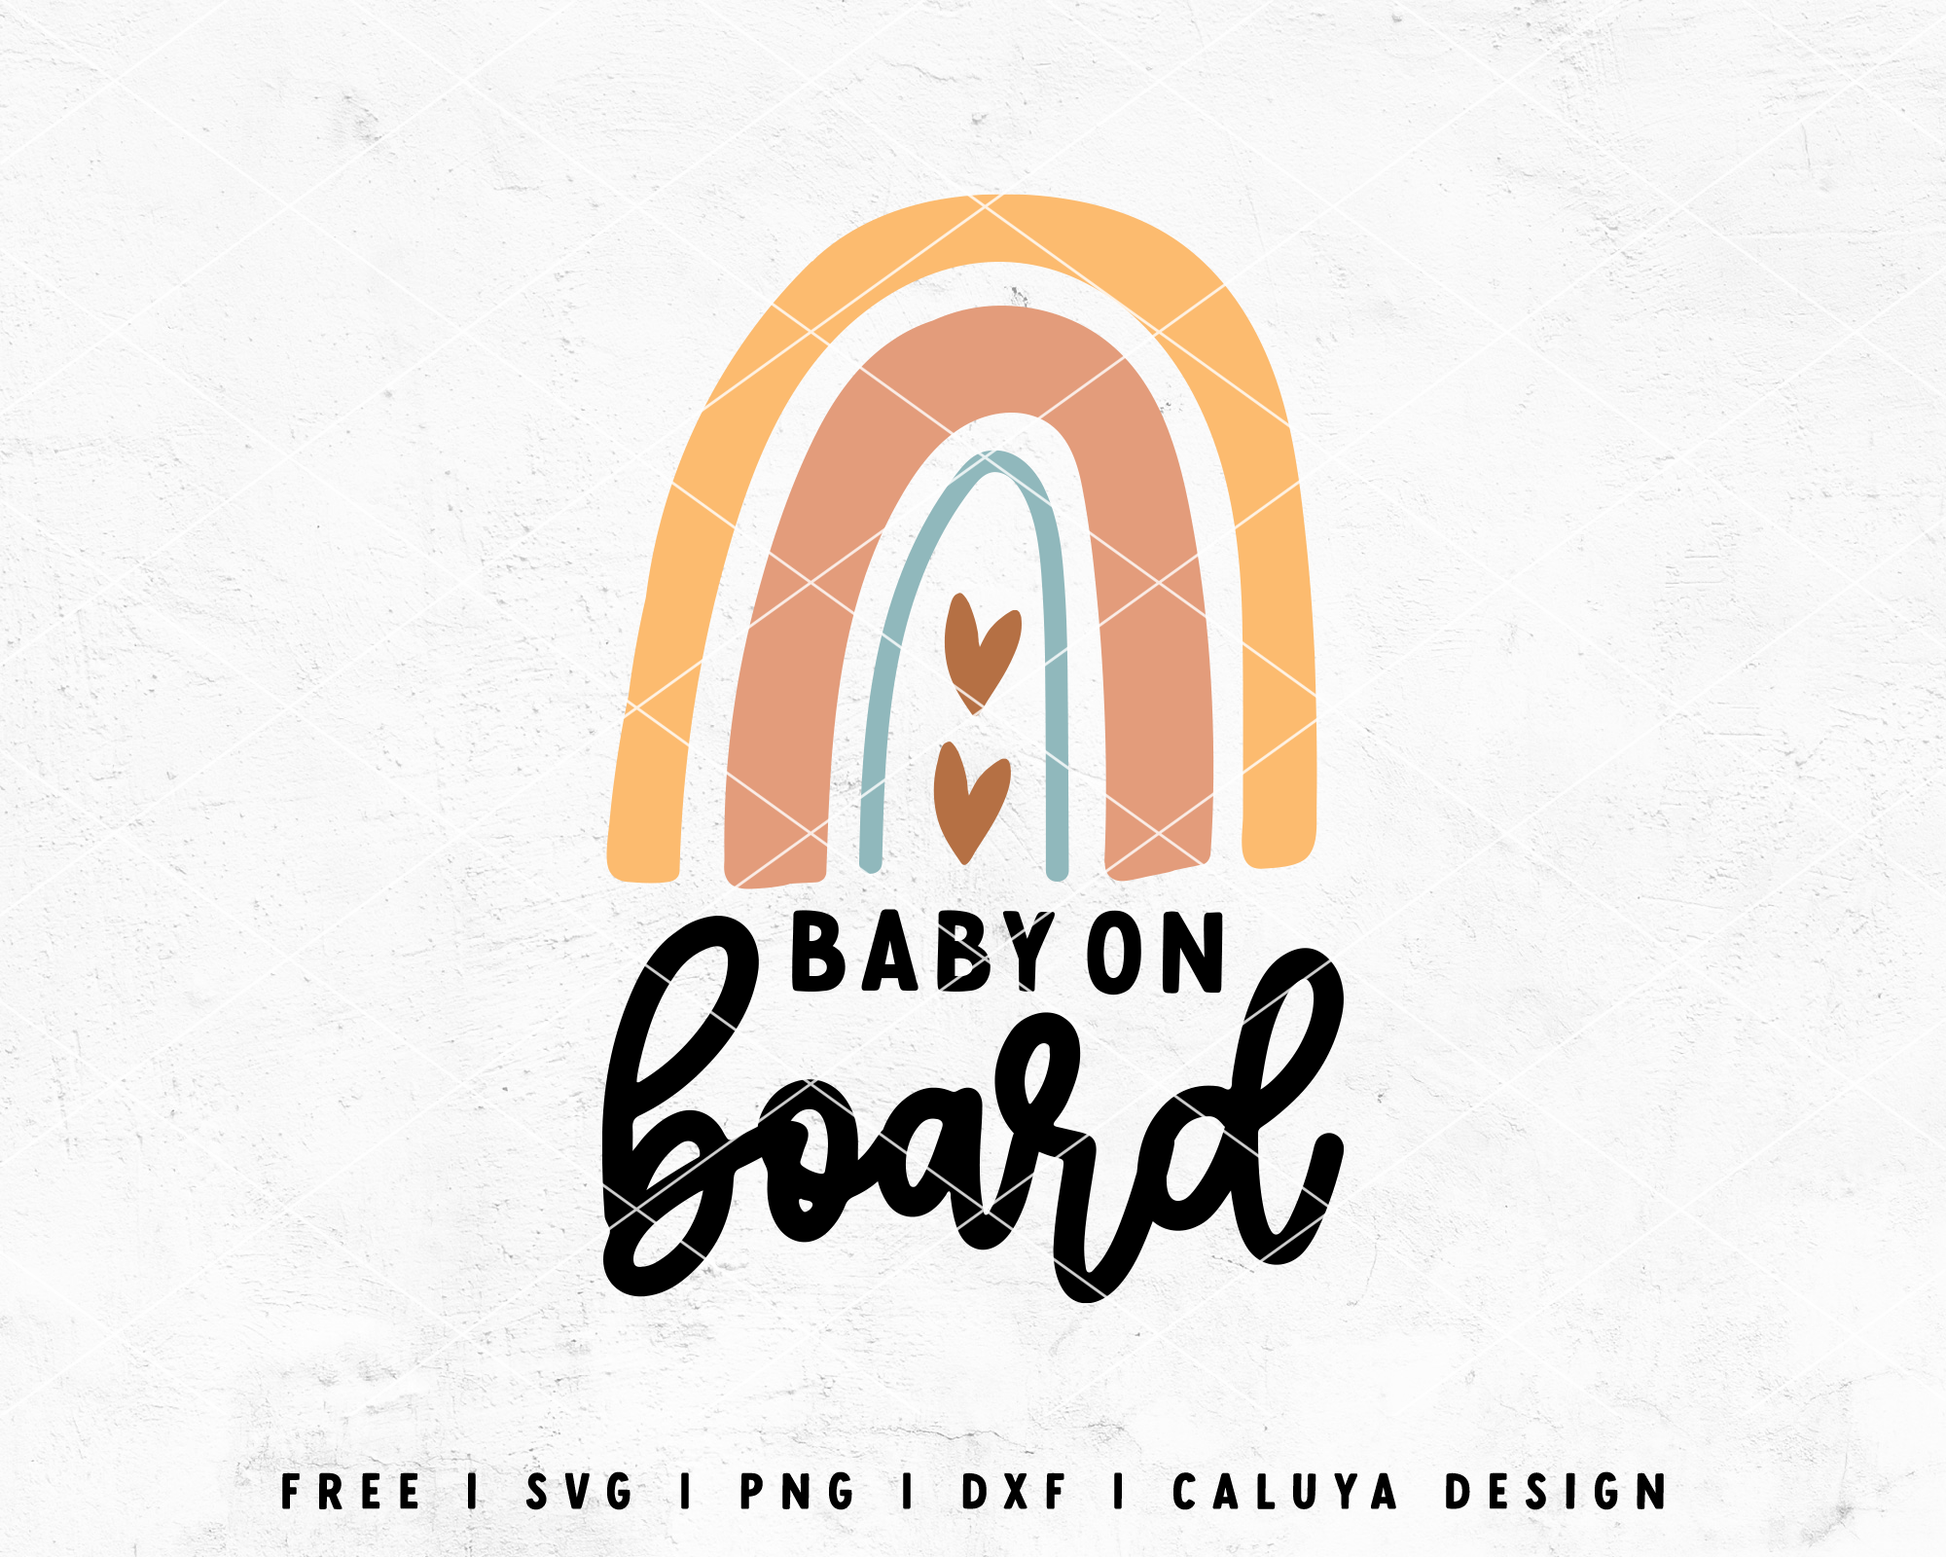 Baby on board sign SVG By SVGPouch